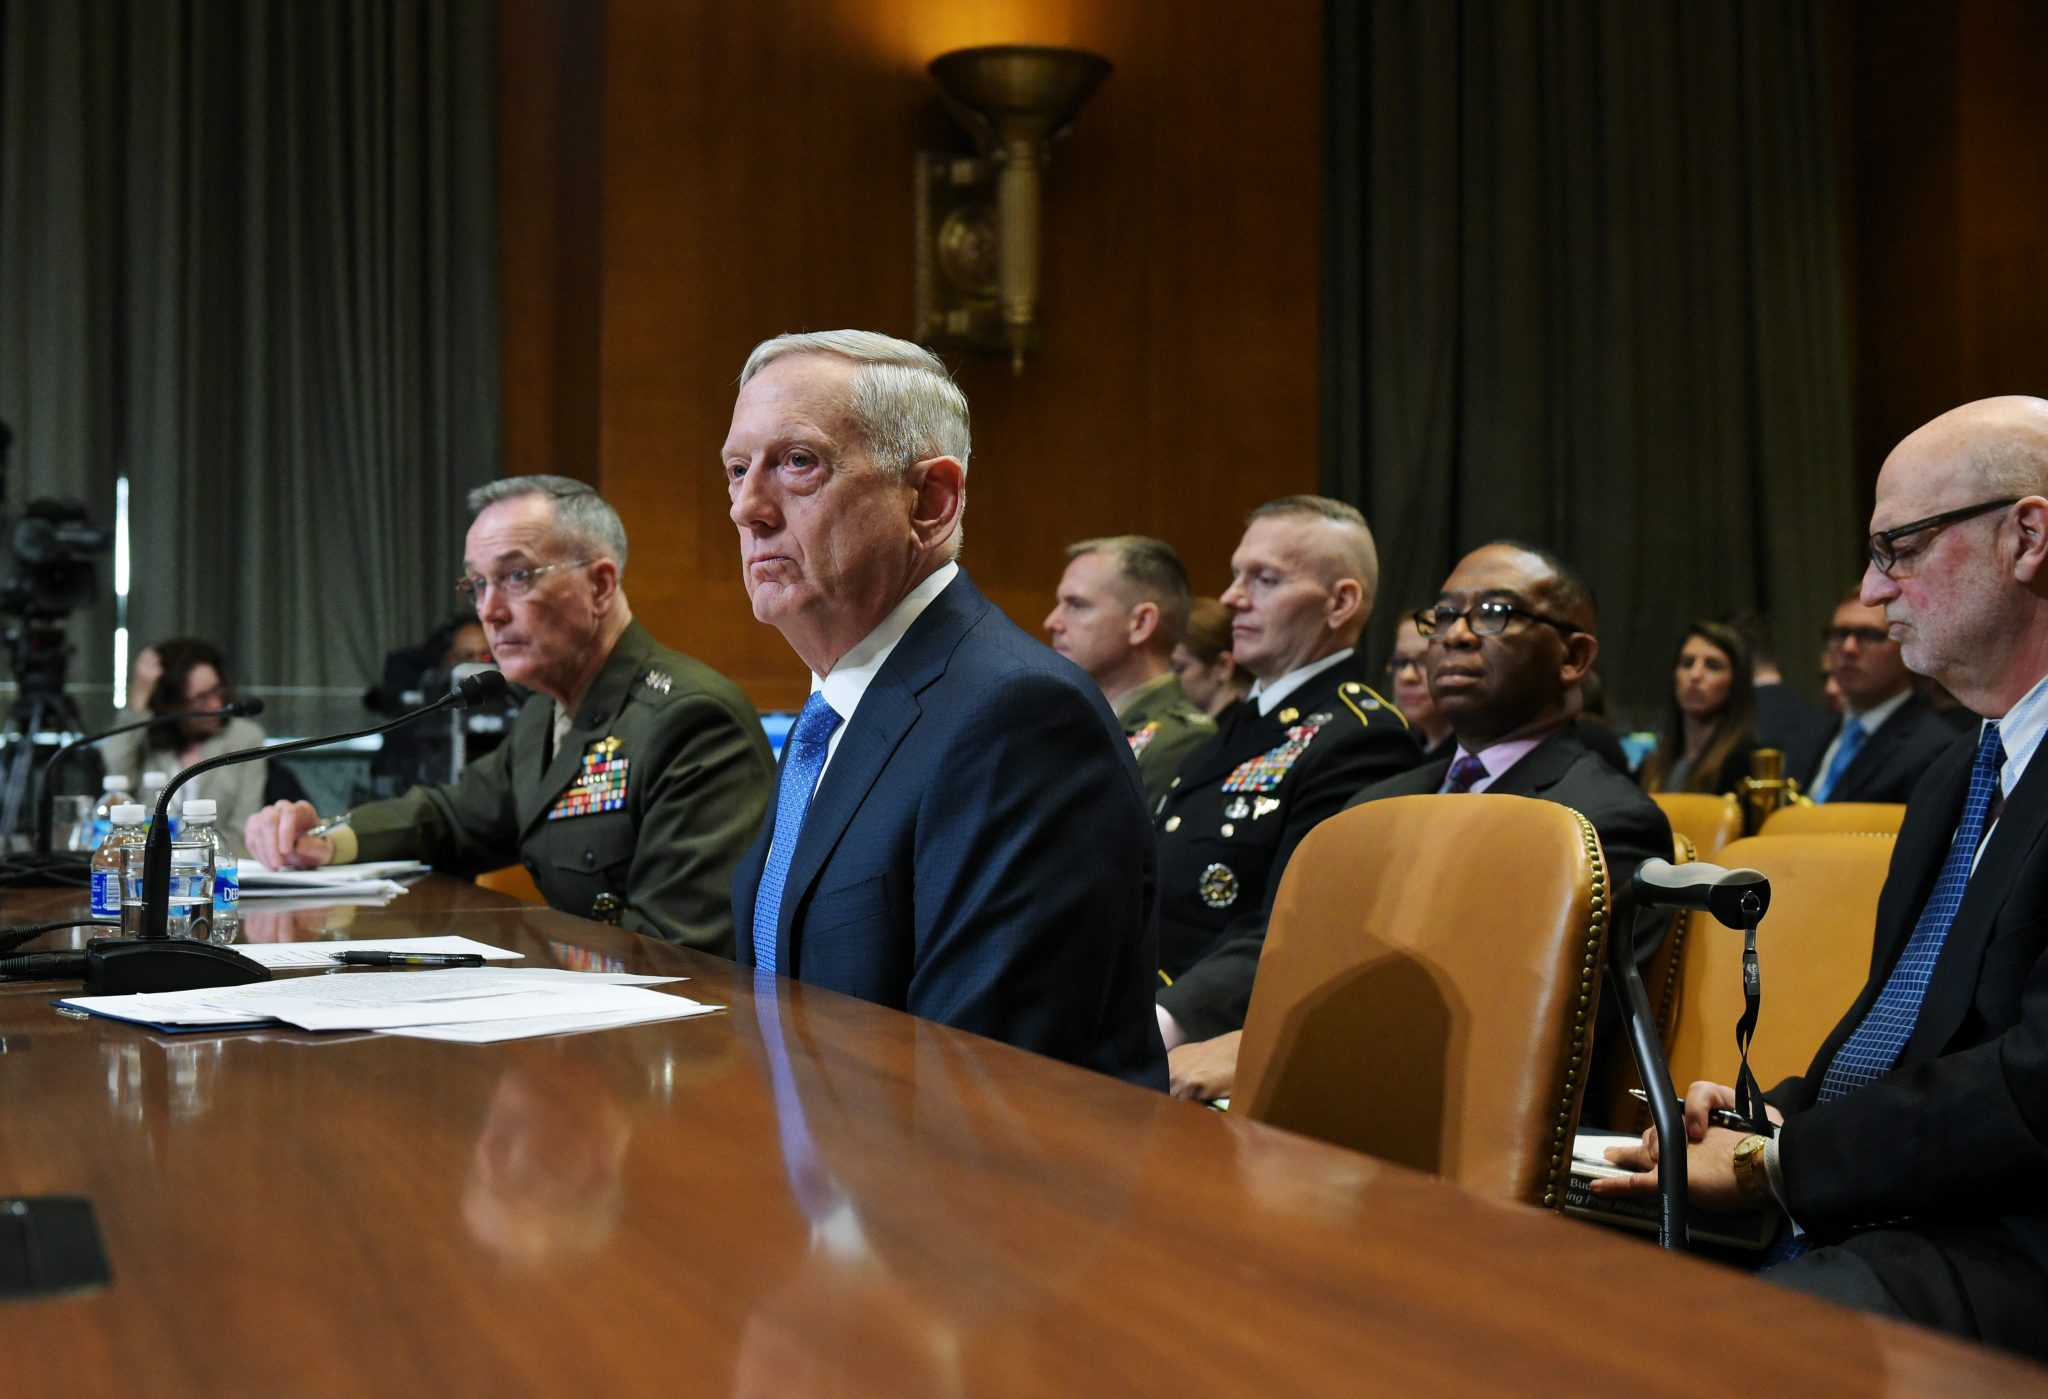 US Defense Secretary James Mattis (R) and Chairman of the Joint Chiefs of Staff Joseph Dunford (L) testify before the Senate Appropriations Committee Defense Subcommittee on defense readiness and budget update in the Dirksen Senate Office Building on March 22, 2017 in Washington, DC. / AFP PHOTO / MANDEL NGAN